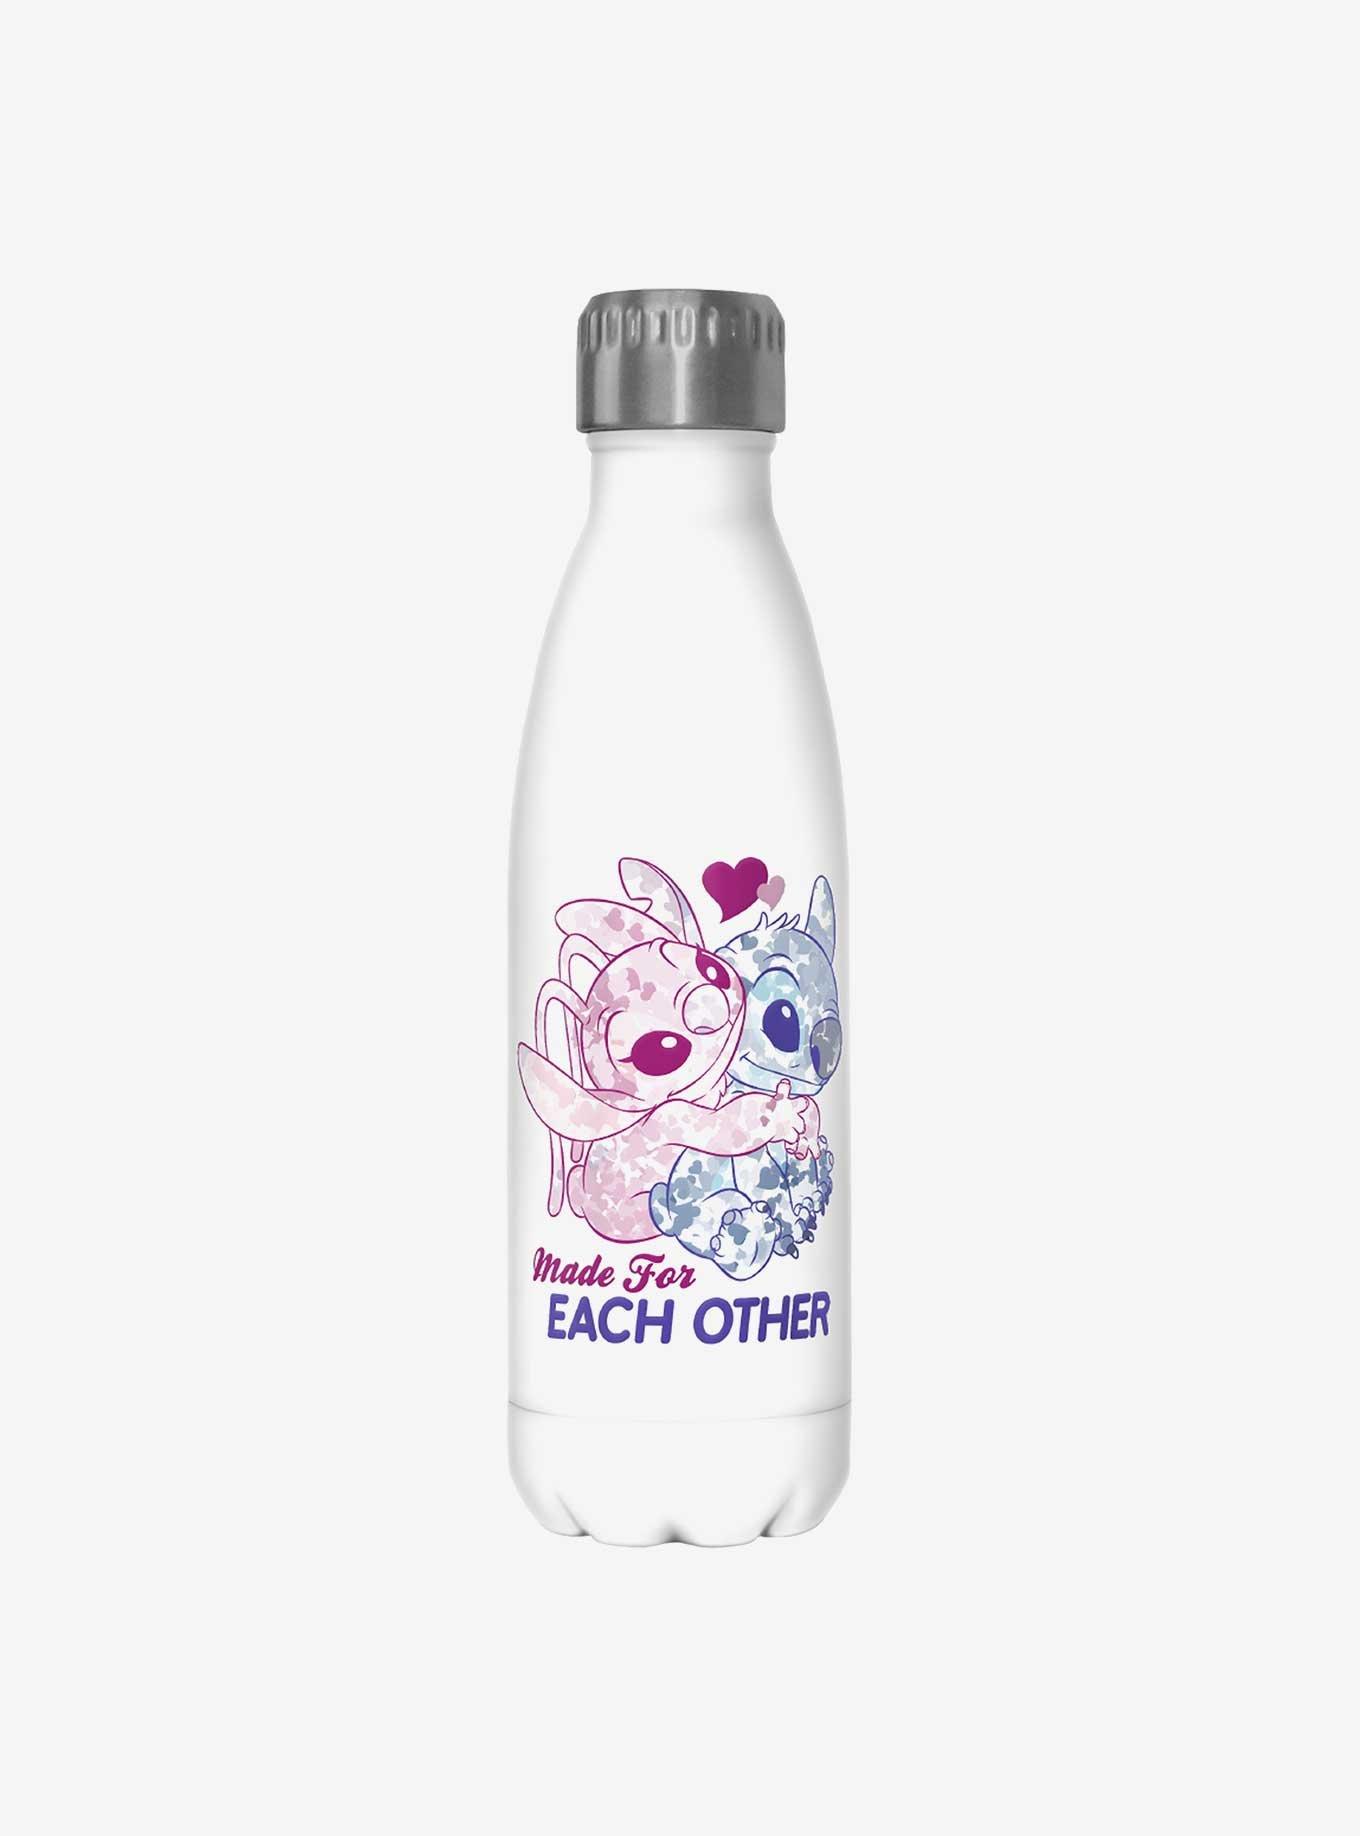 Disney Stitch and Angel Stainless Steel Water Bottle 500ml